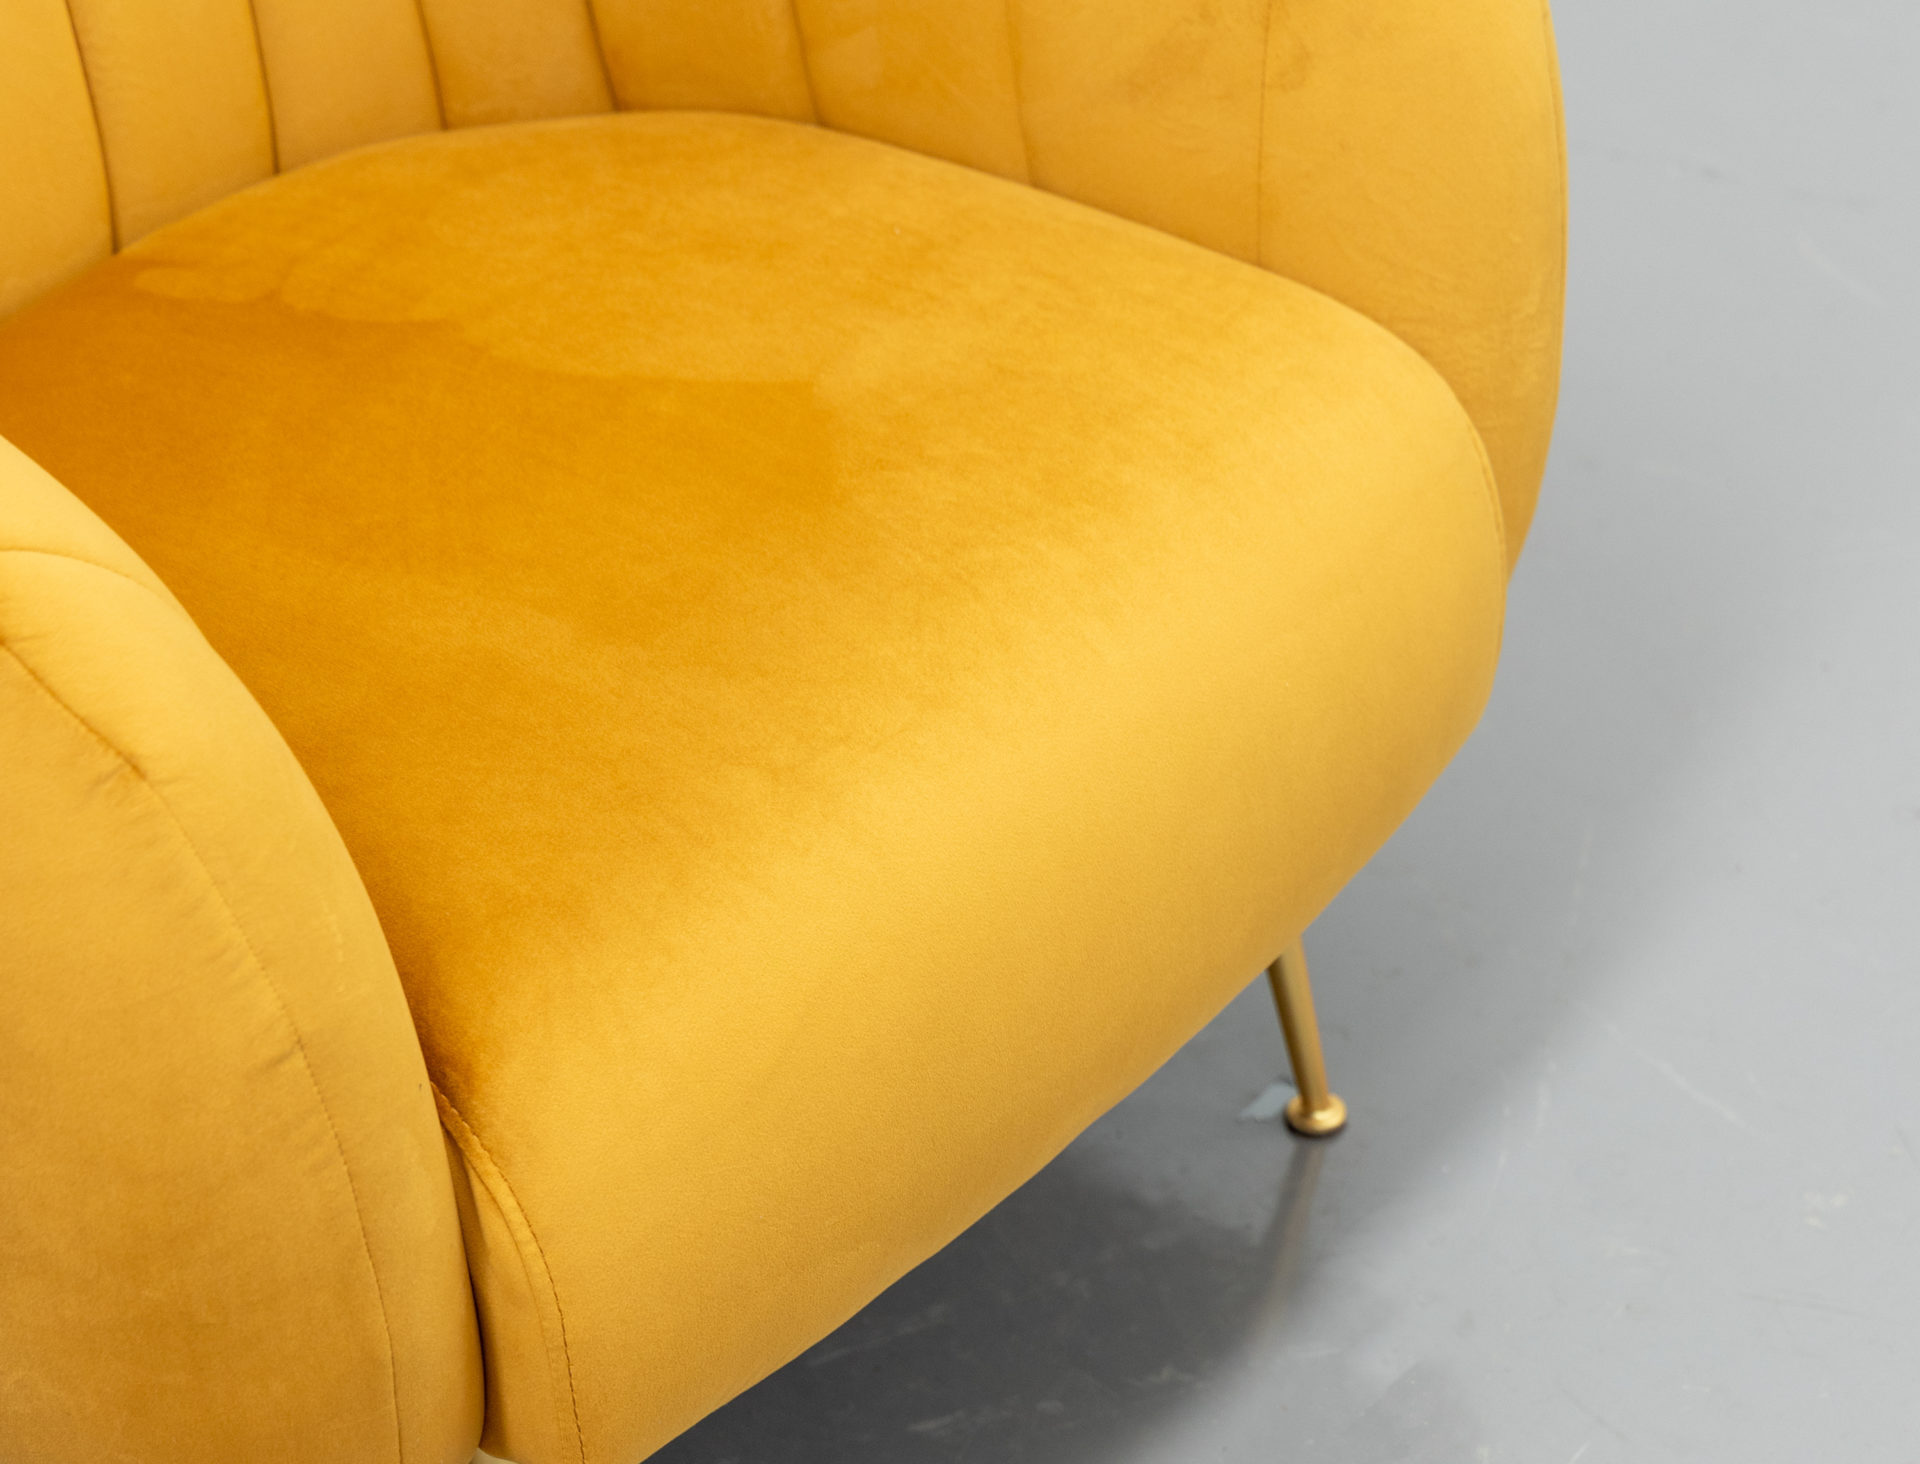 Event furniture hire - yellow velvet armchair available to hire for events in London